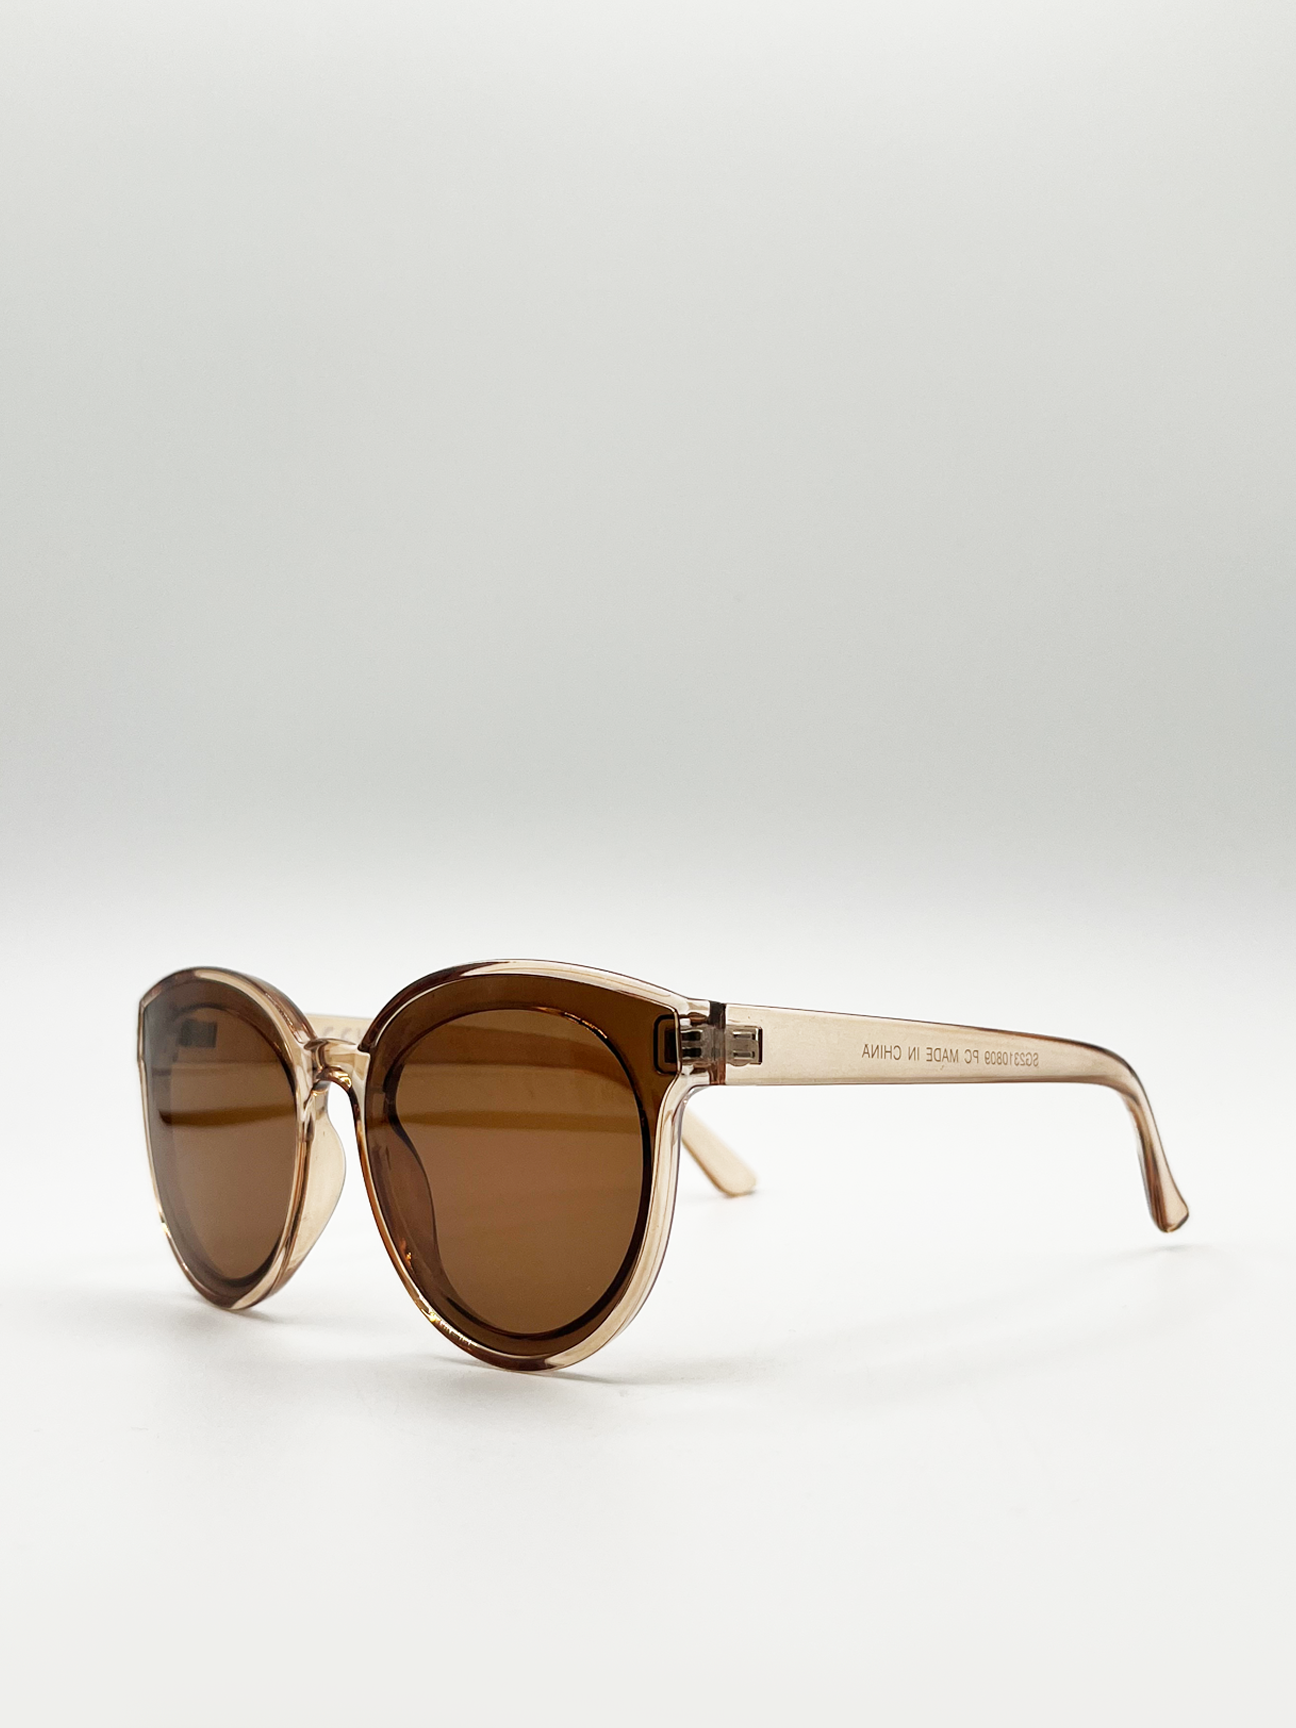 Sand Clear Frame Round Wayfarer Style Oversized Sunglasses with Brown Lenses